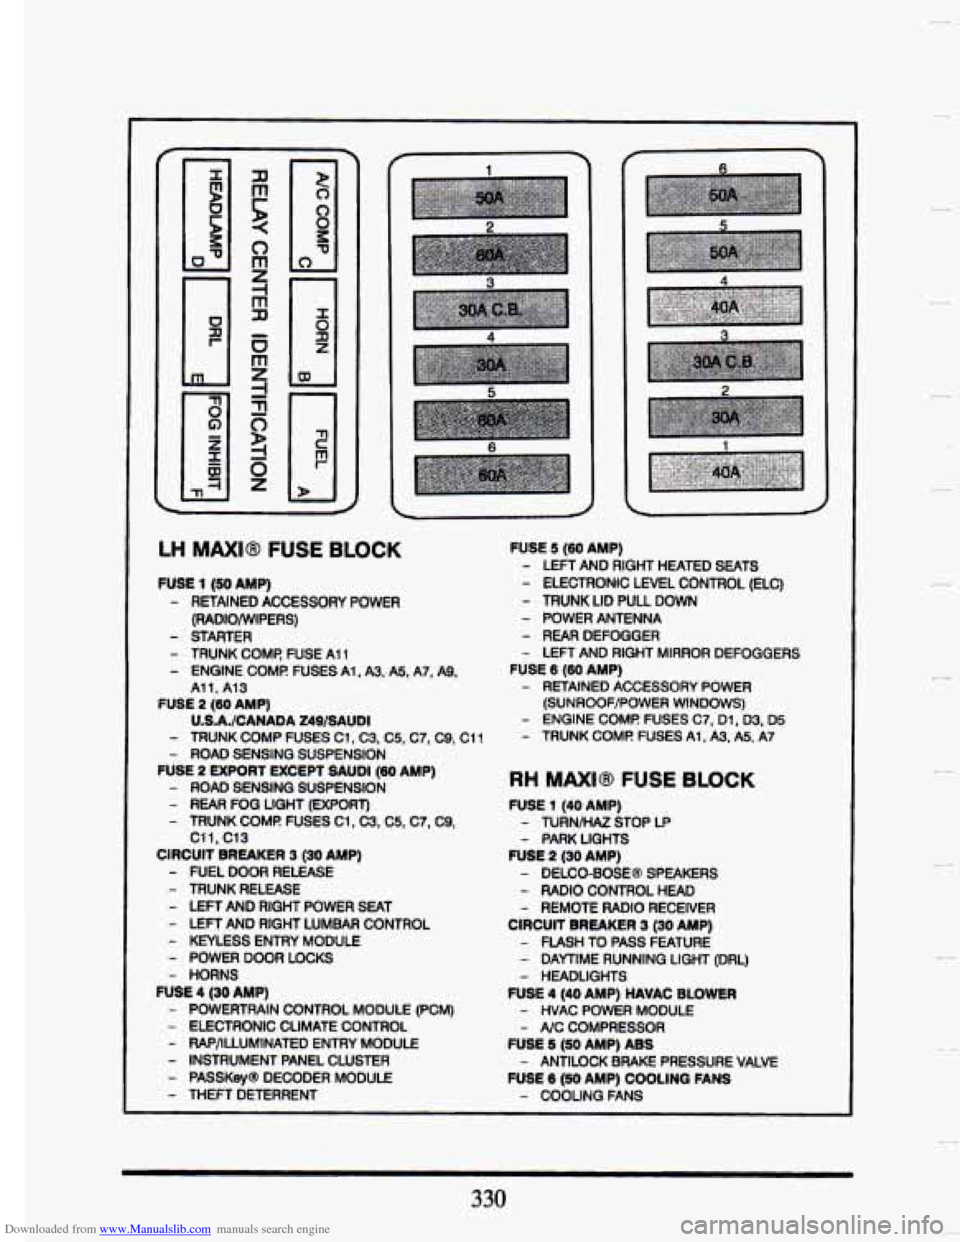 CADILLAC SEVILLE 1993 4.G Owners Manual Downloaded from www.Manualslib.com manuals search engine I 
e 
LH MAXI@ FUSE BLOCK 
FUSE 1 (50 AMP) 
- RETAINED  ACCESSORY  POWER (RADIOMIIPERS) 
- STARTER 
- TRUNK  COMR  FUSE  AI 1 
- ENGINE  COME  